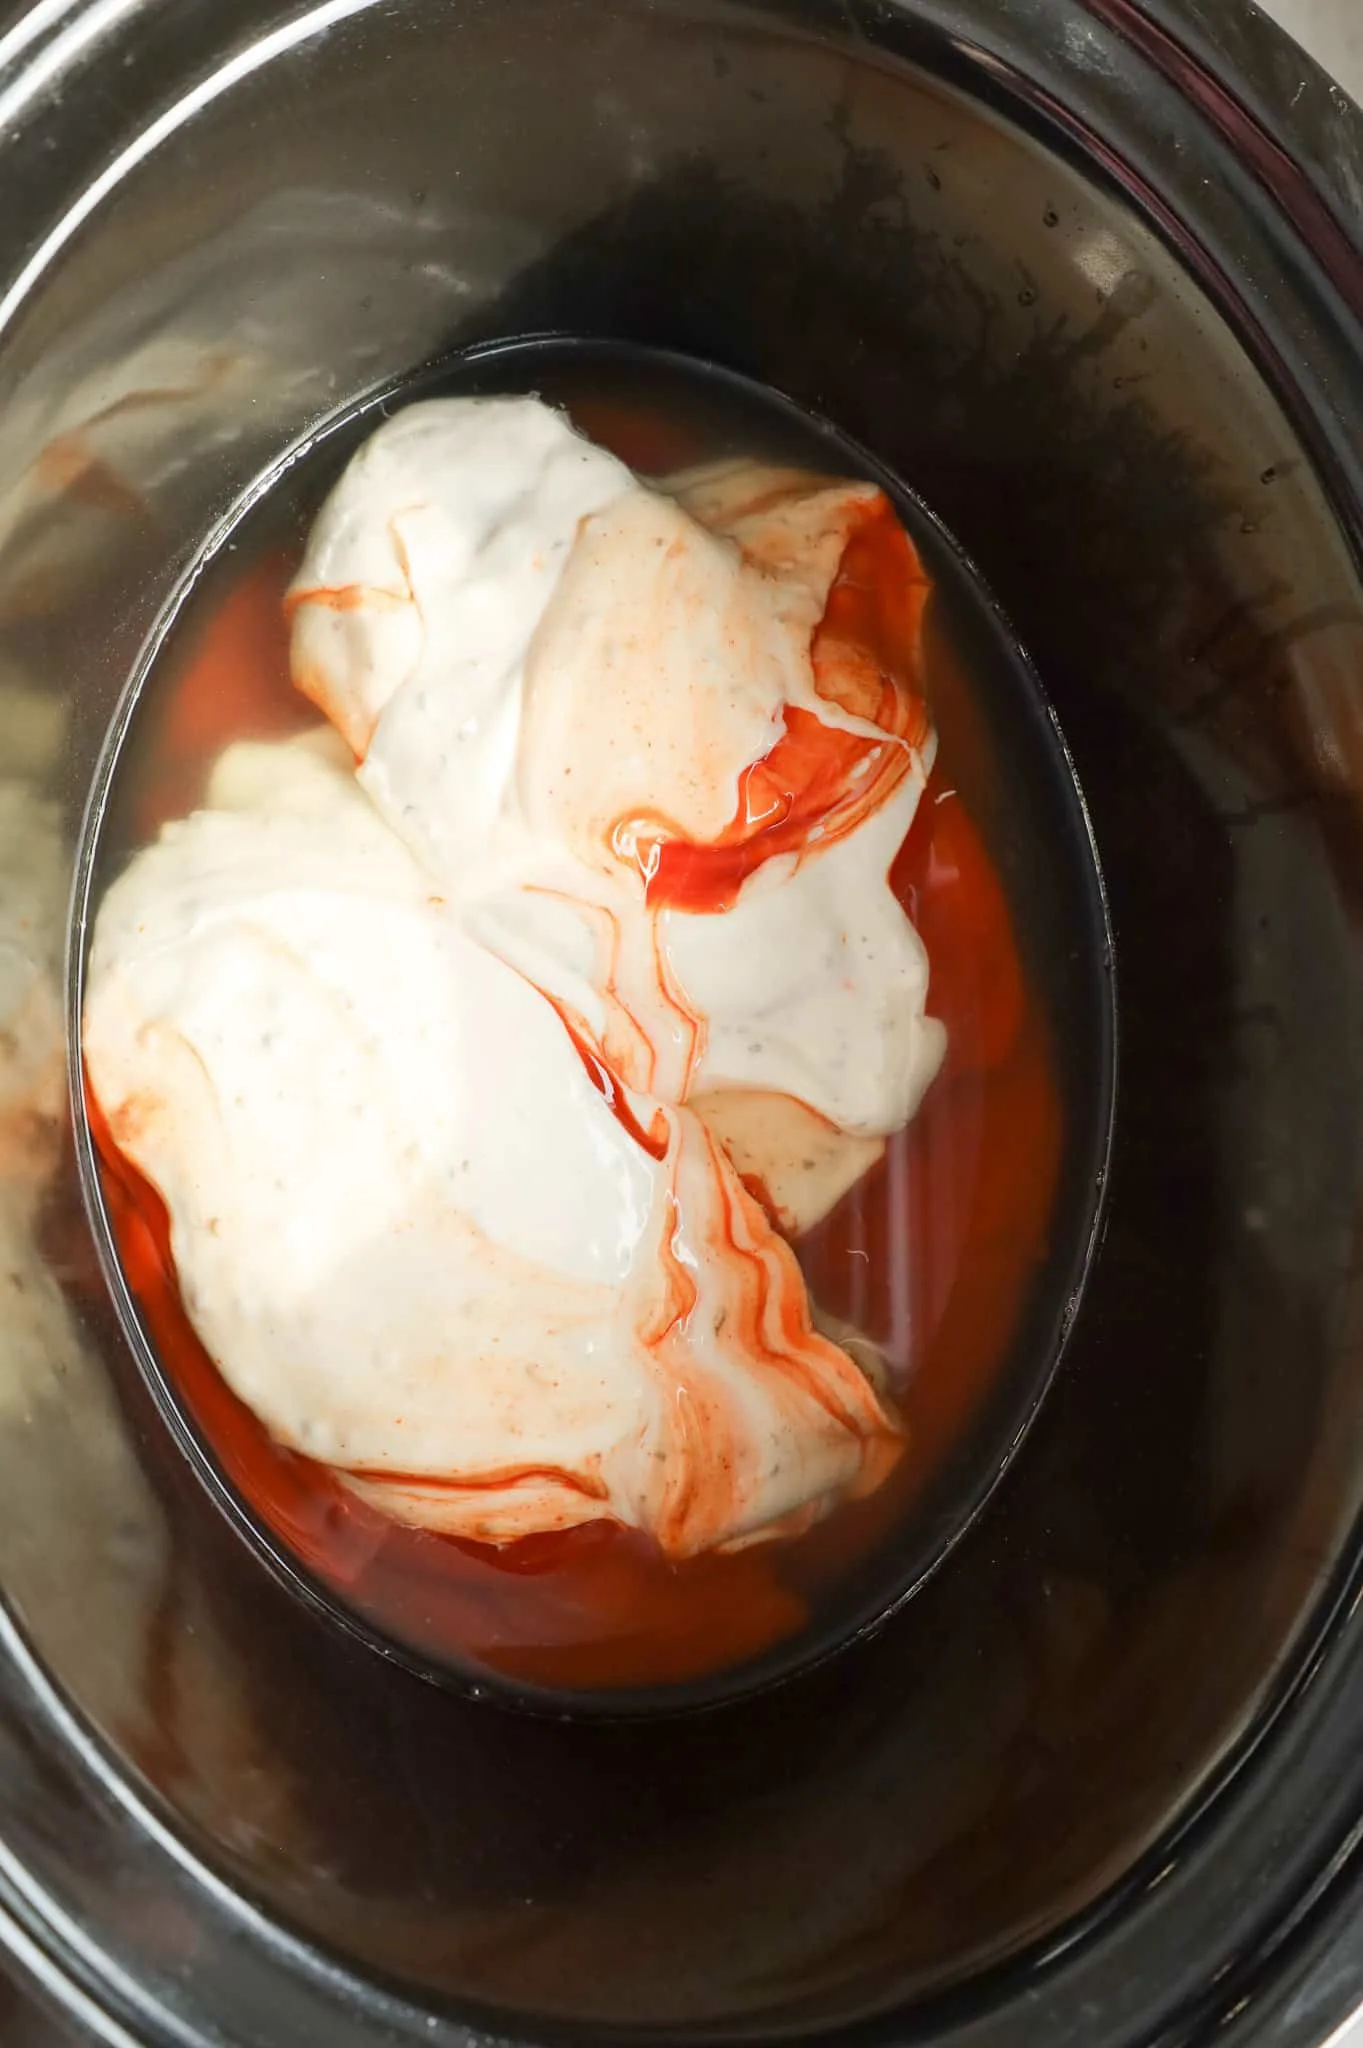 ranch dressing and Buffalo sauce on top of chicken breasts in a crock pot